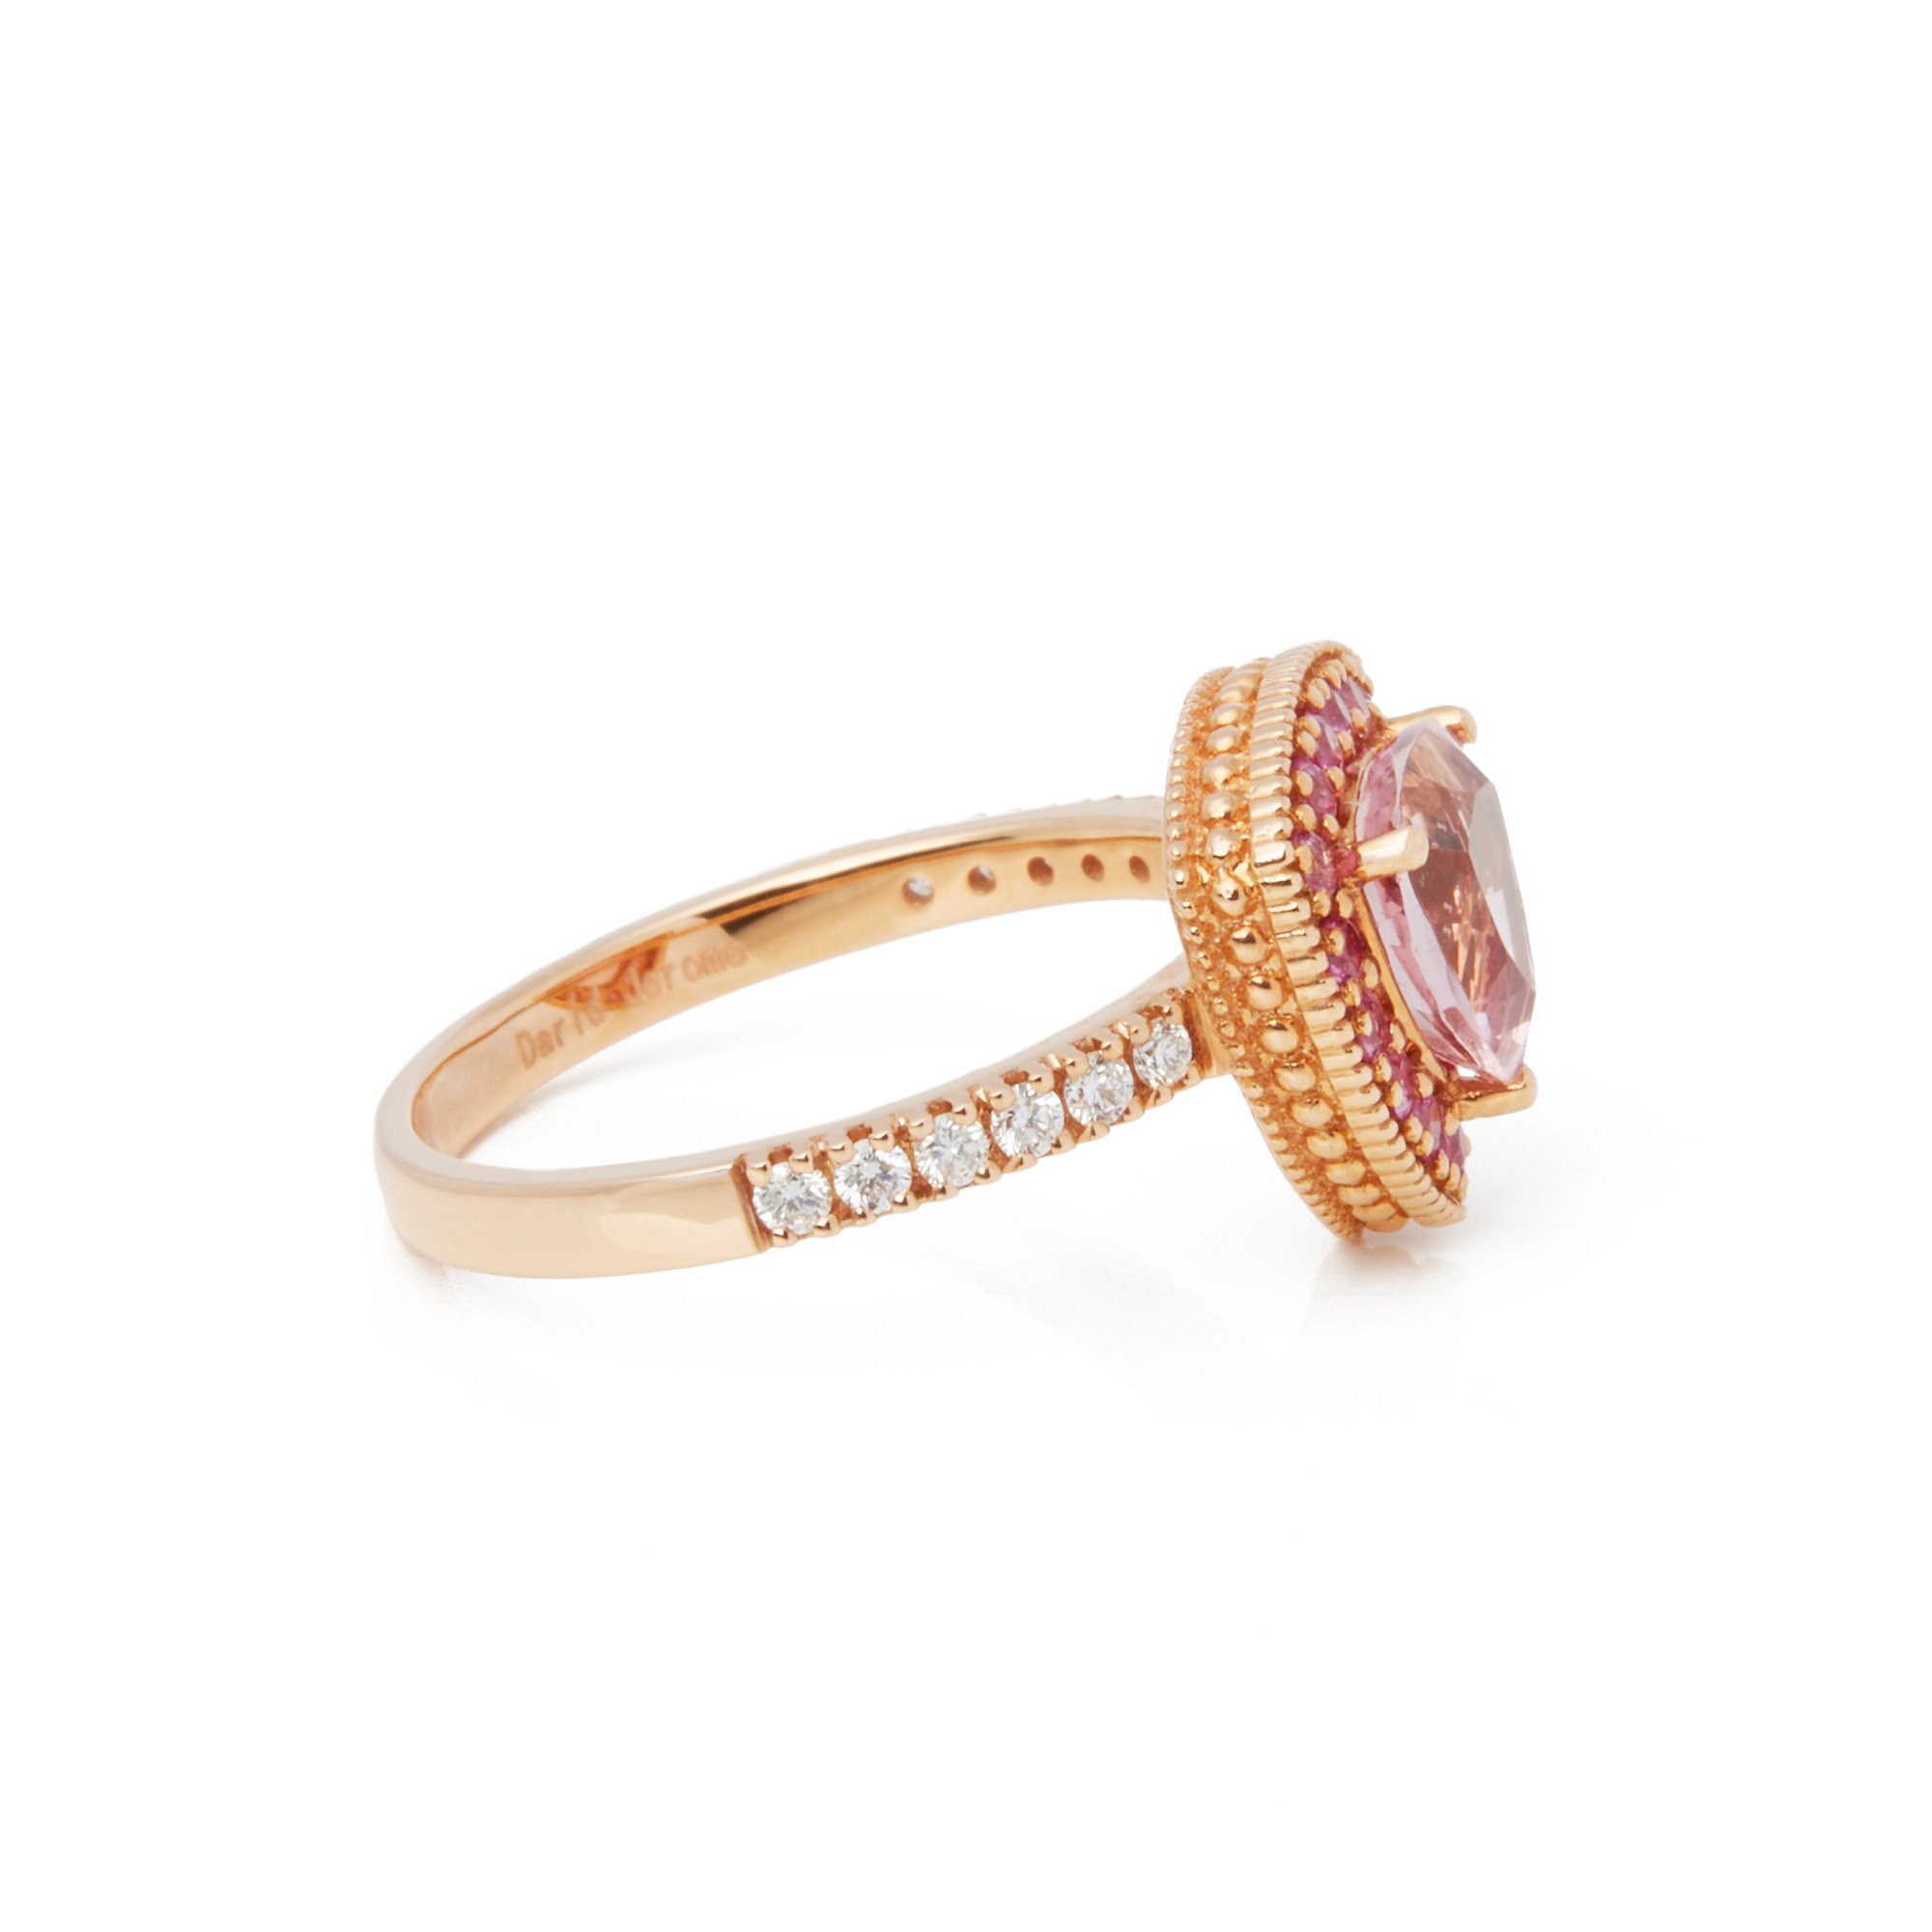 David Jerome 18ct Rose Gold Morganite, Diamond and Pink Sapphire Cluster Ring